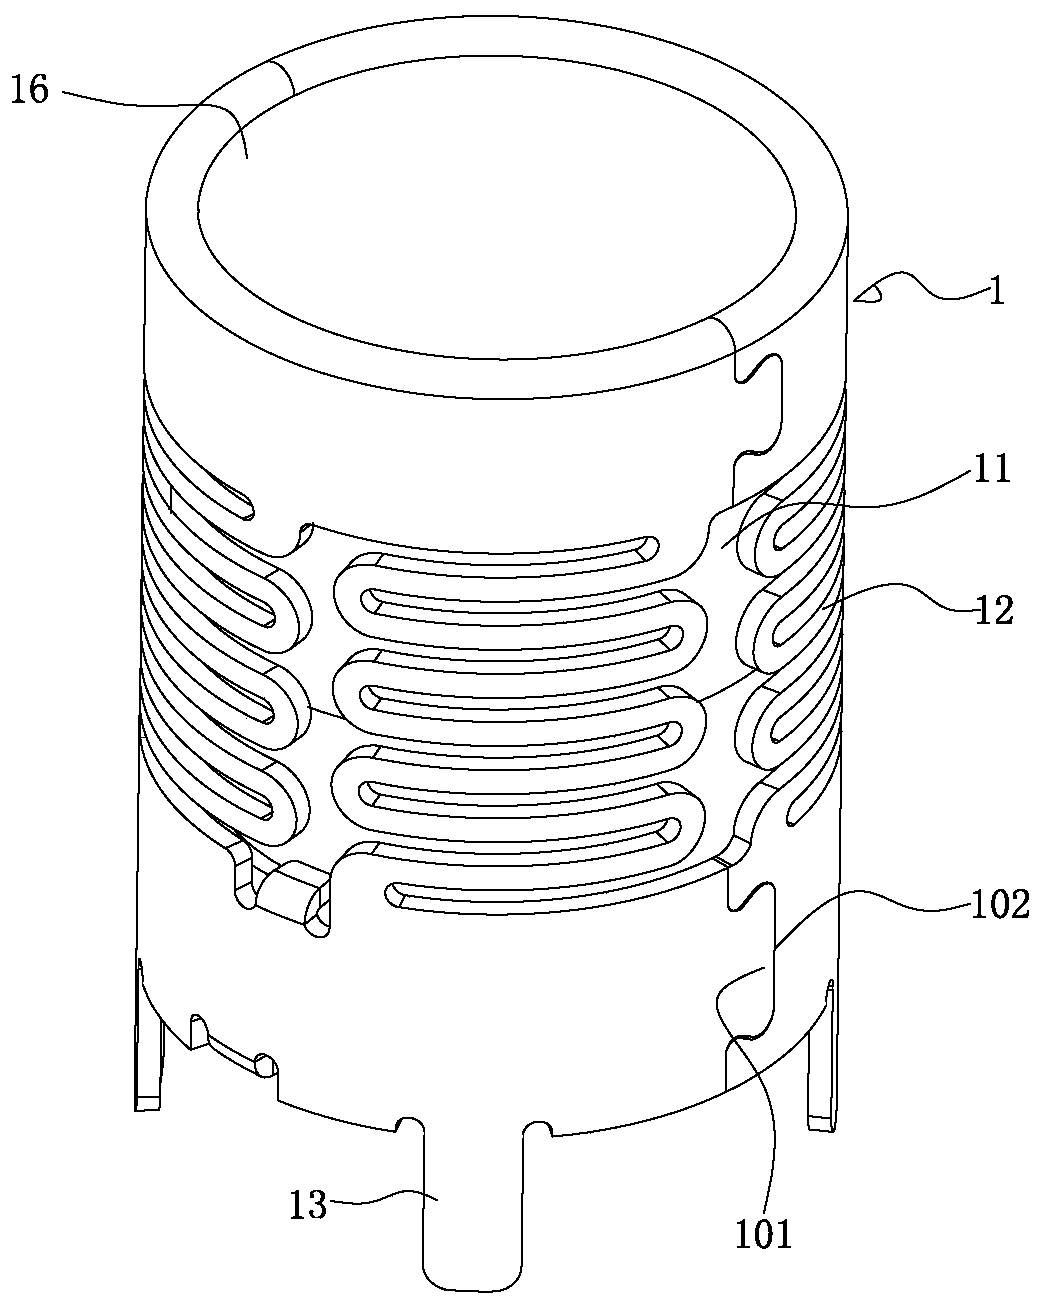 Cylindrical elastic component and coaxial connector